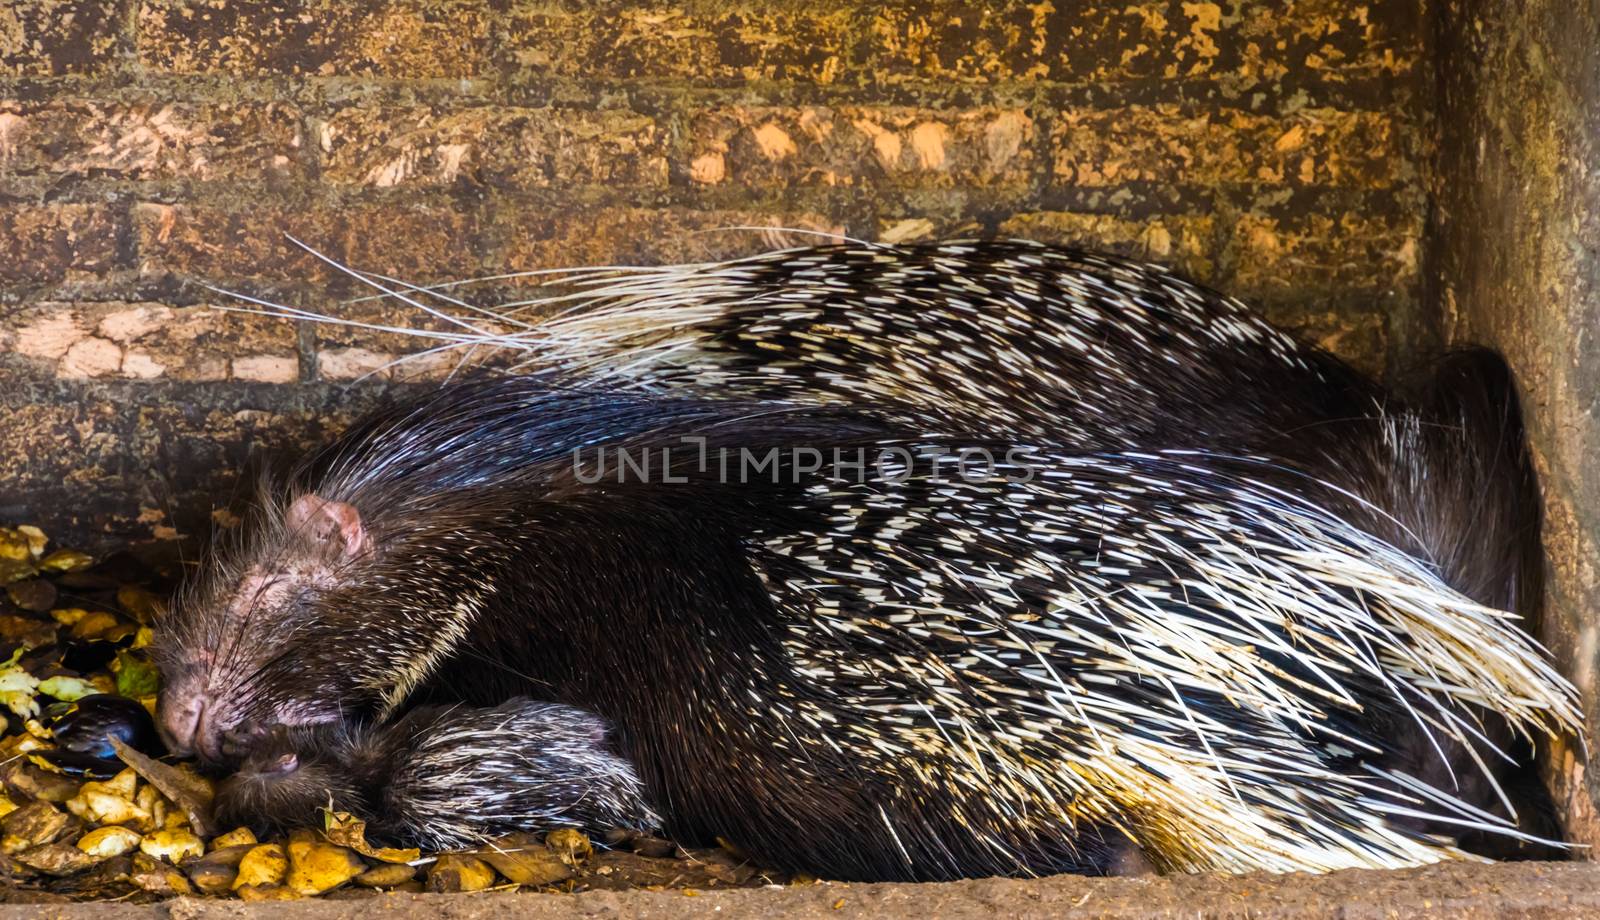 crested porcupine couple sleeping together, tropical rodent specie from Africa by charlottebleijenberg